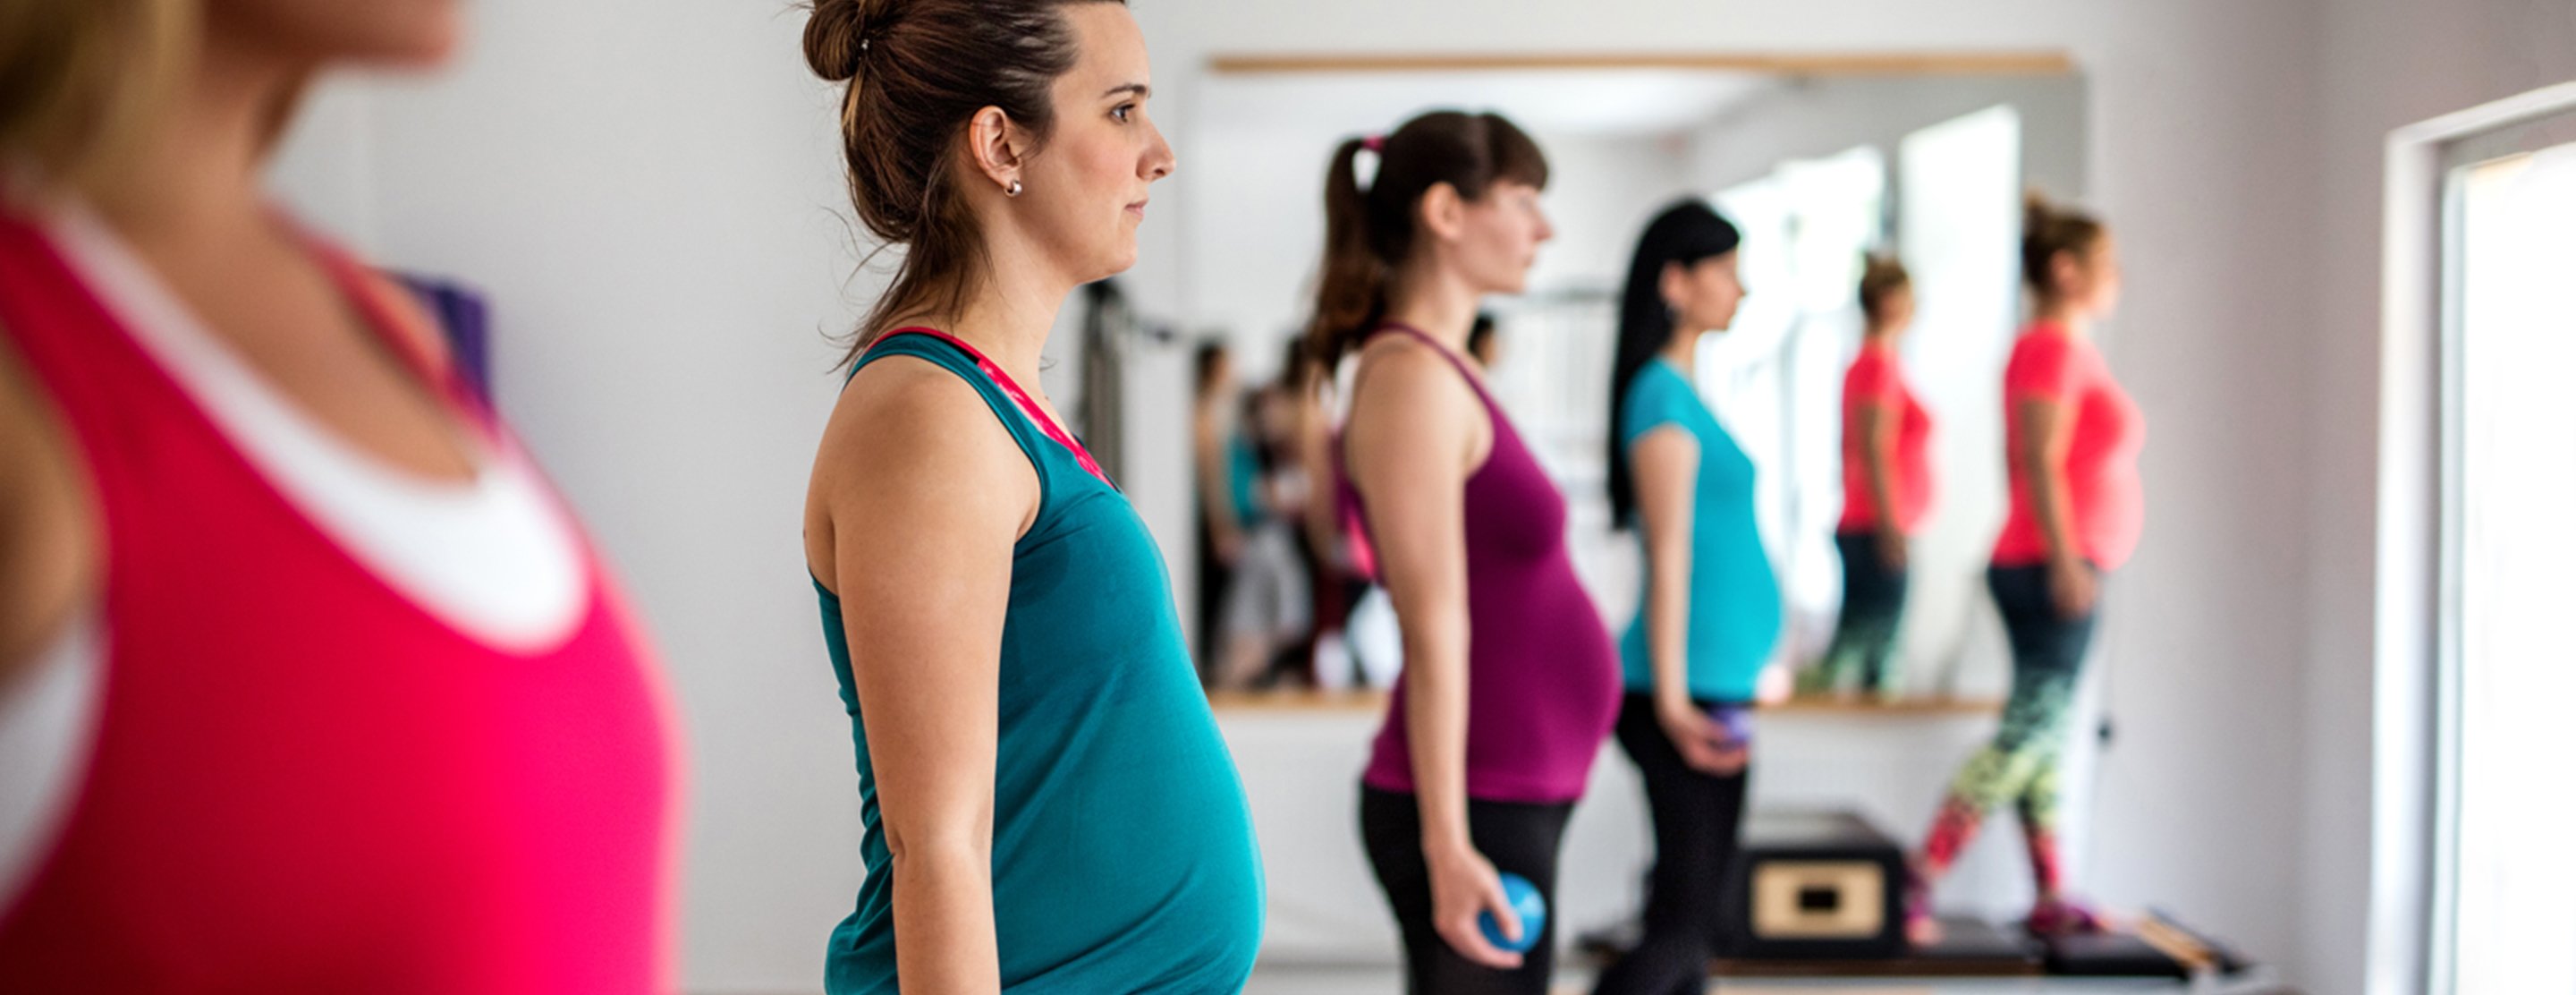 https://www.ucsfhealth.org/-/media/project/ucsf/ucsf-health/education/hero/exercise-during-pregnancy-2x.jpg